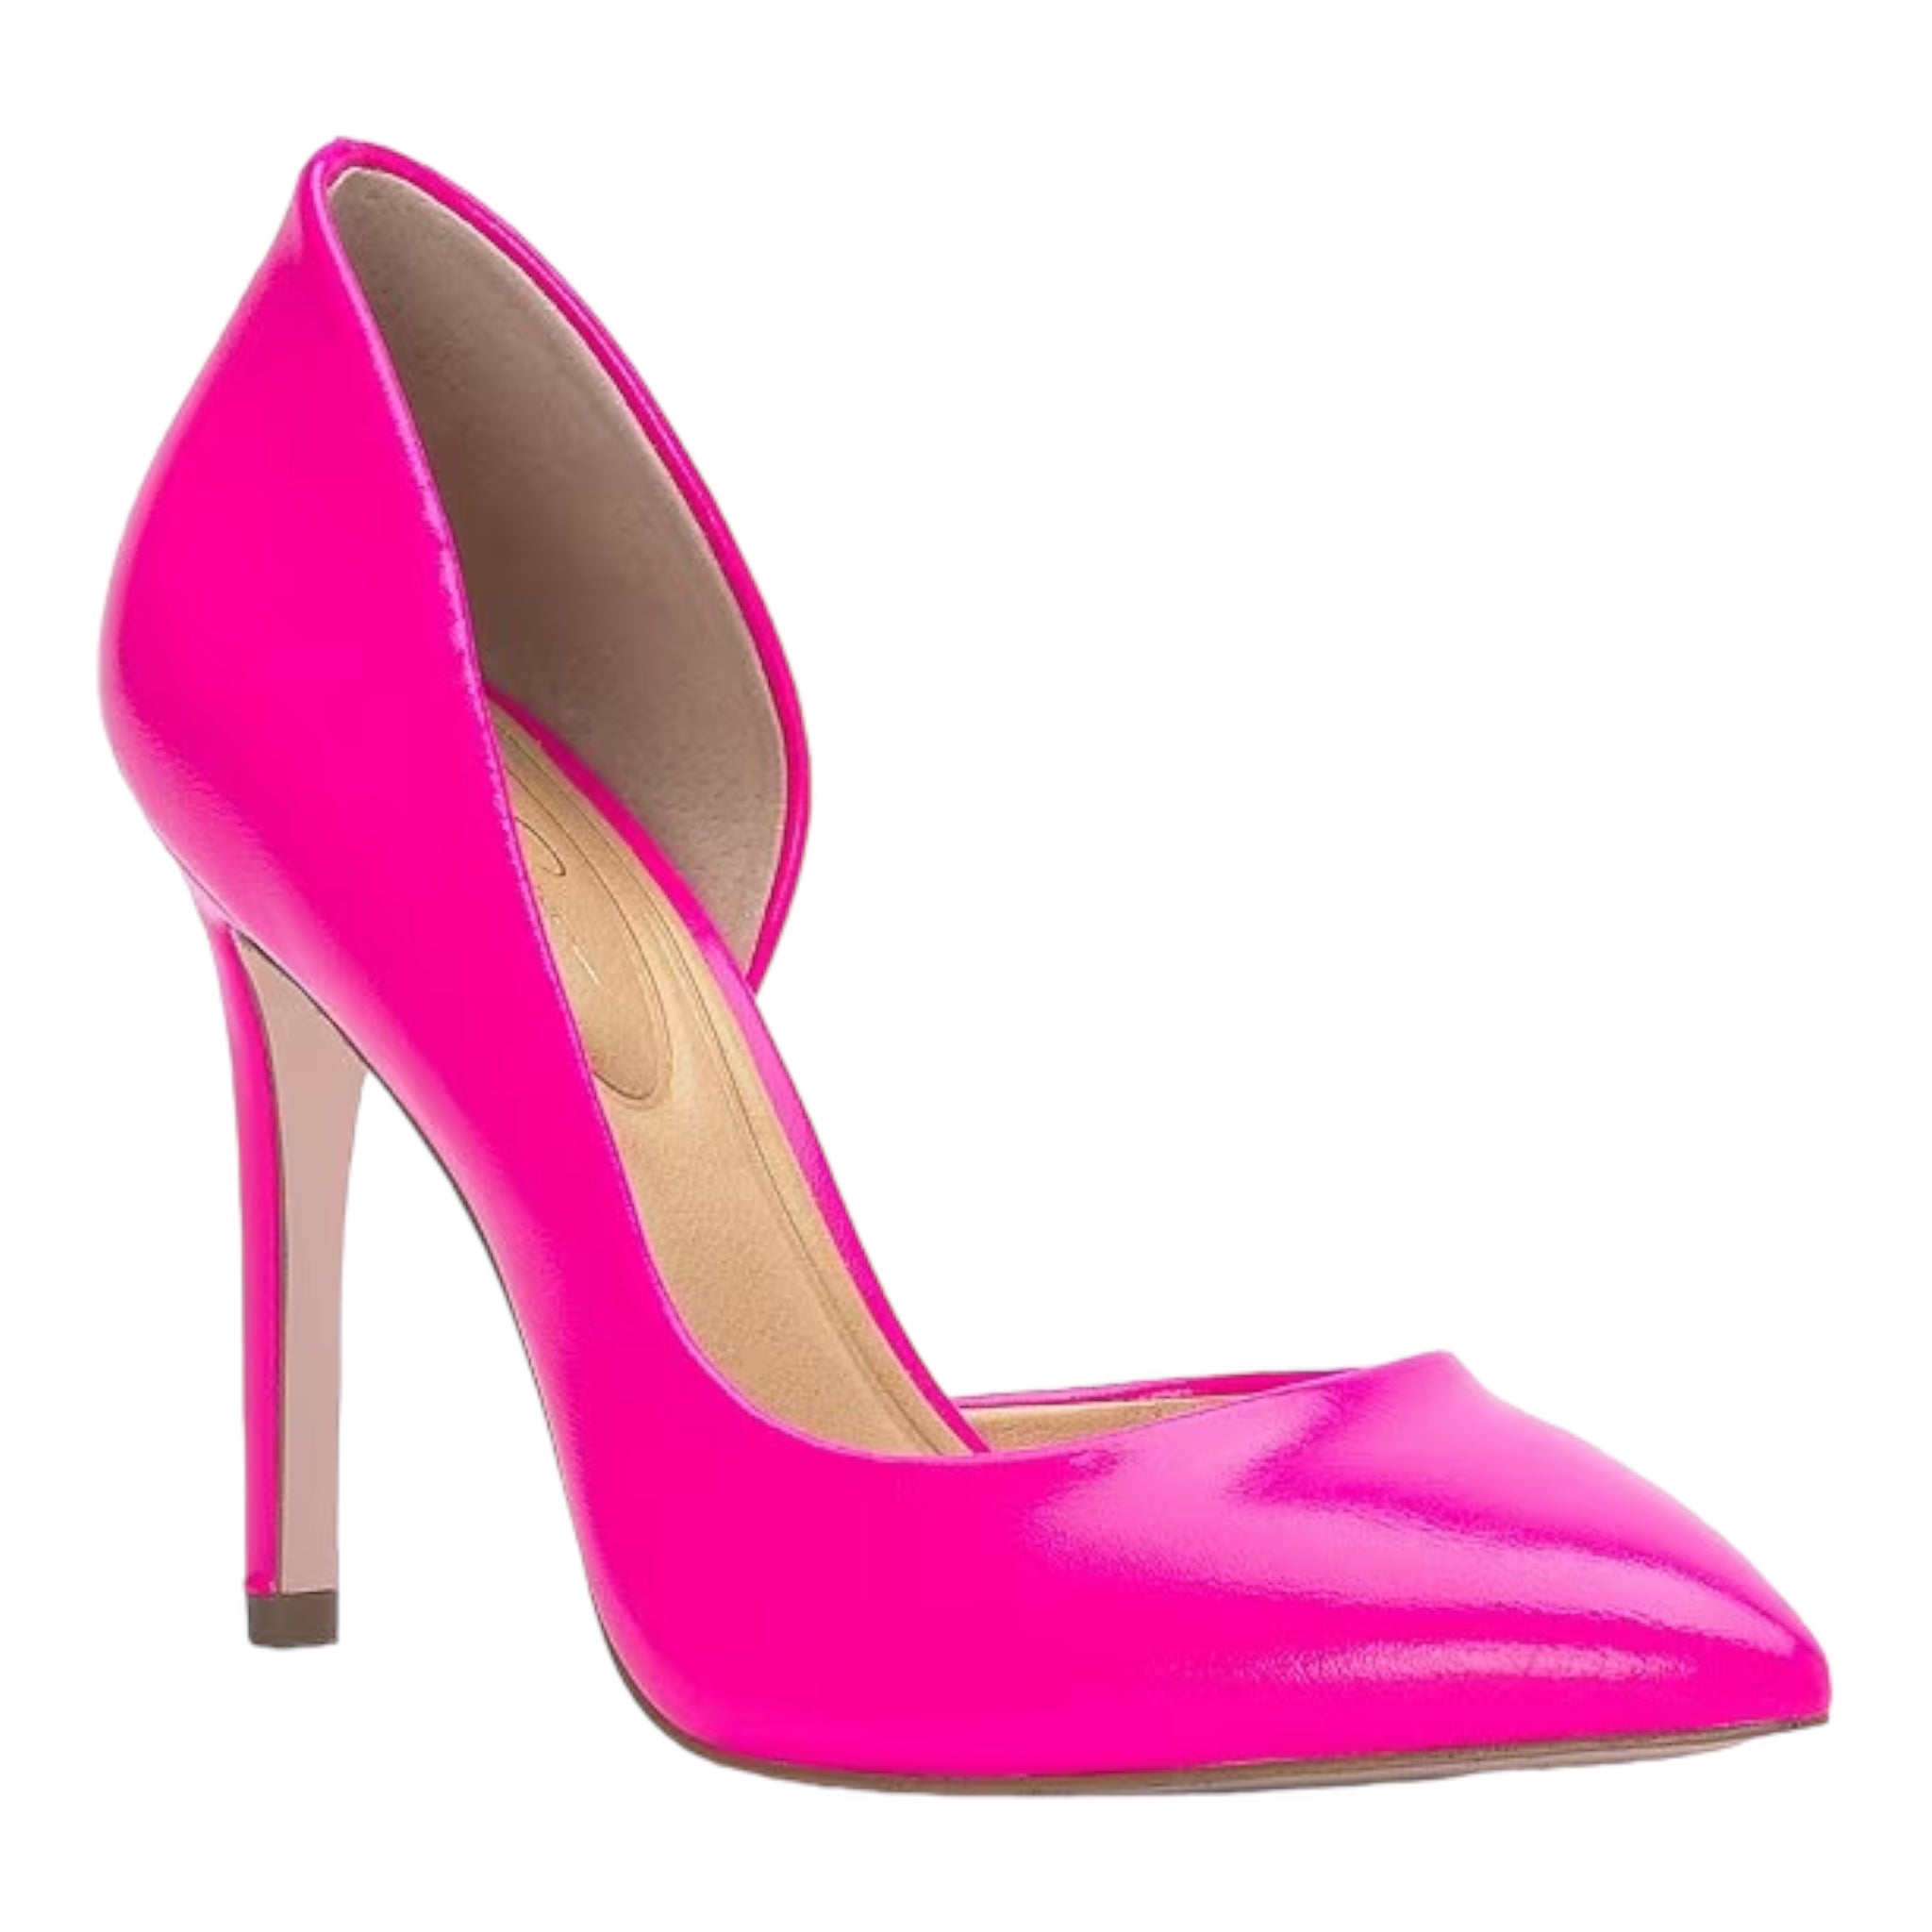 JESSICA SIMPSON PATENT D'ORSAY POINTED TOE PUMP IN PINK